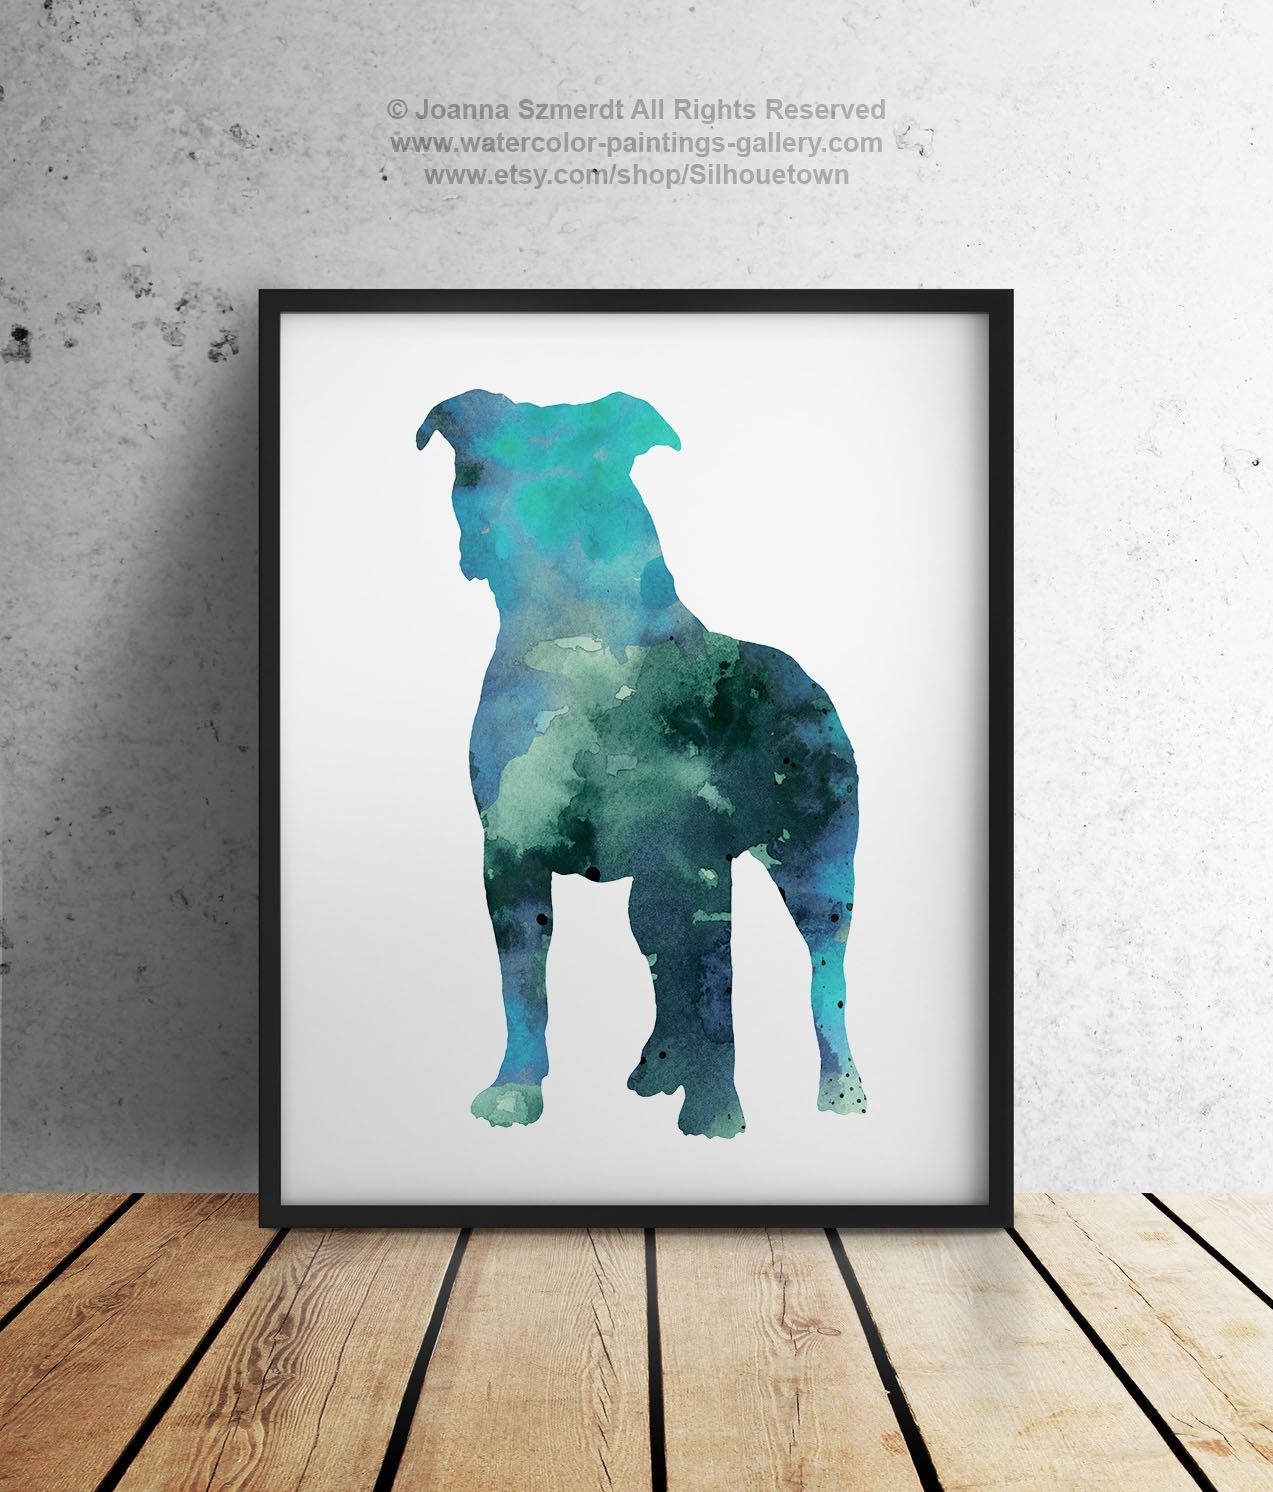 Blue Pitbull Silhouette Gift Idea Abstract Kids Room Dog Wall Art Within Most Popular Abstract Dog Wall Art (View 1 of 20)